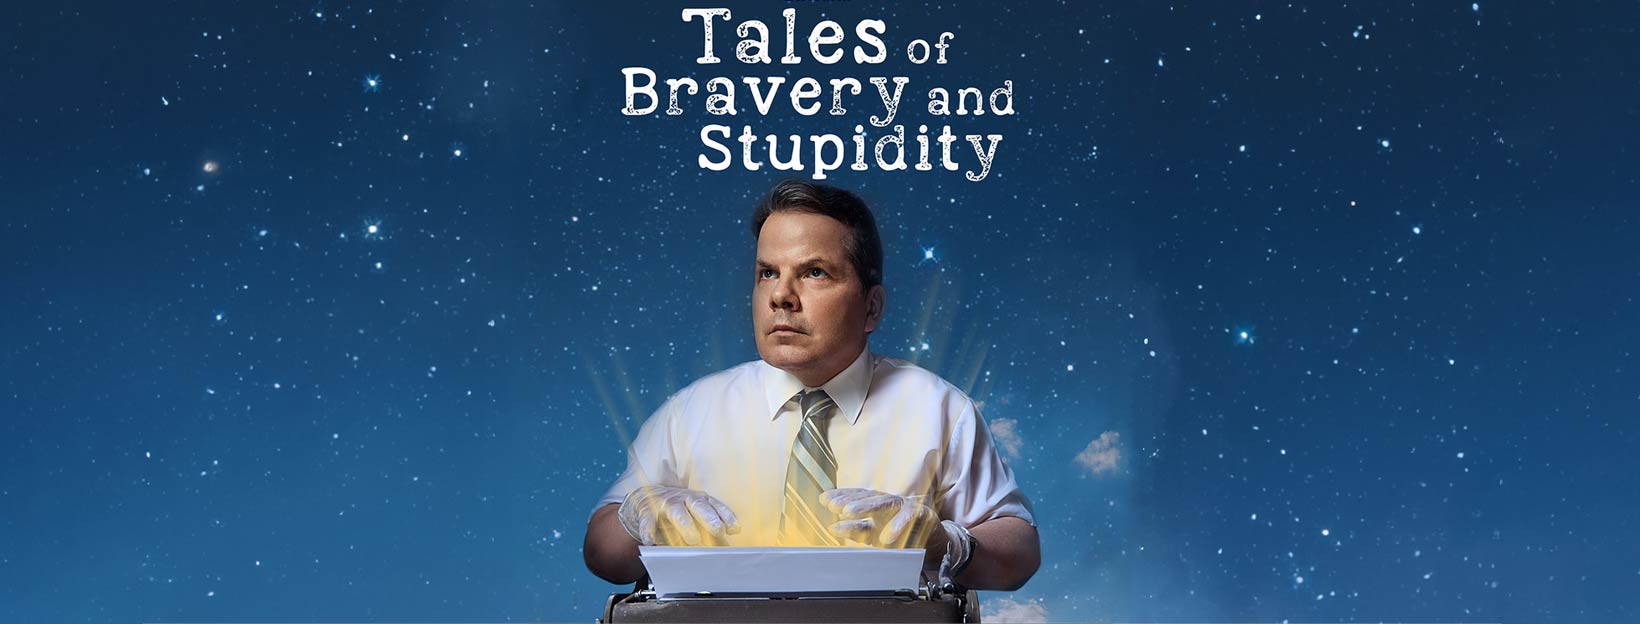 Toronto Events - Bruce McCulloch's Tales of Bravery & Stupidity